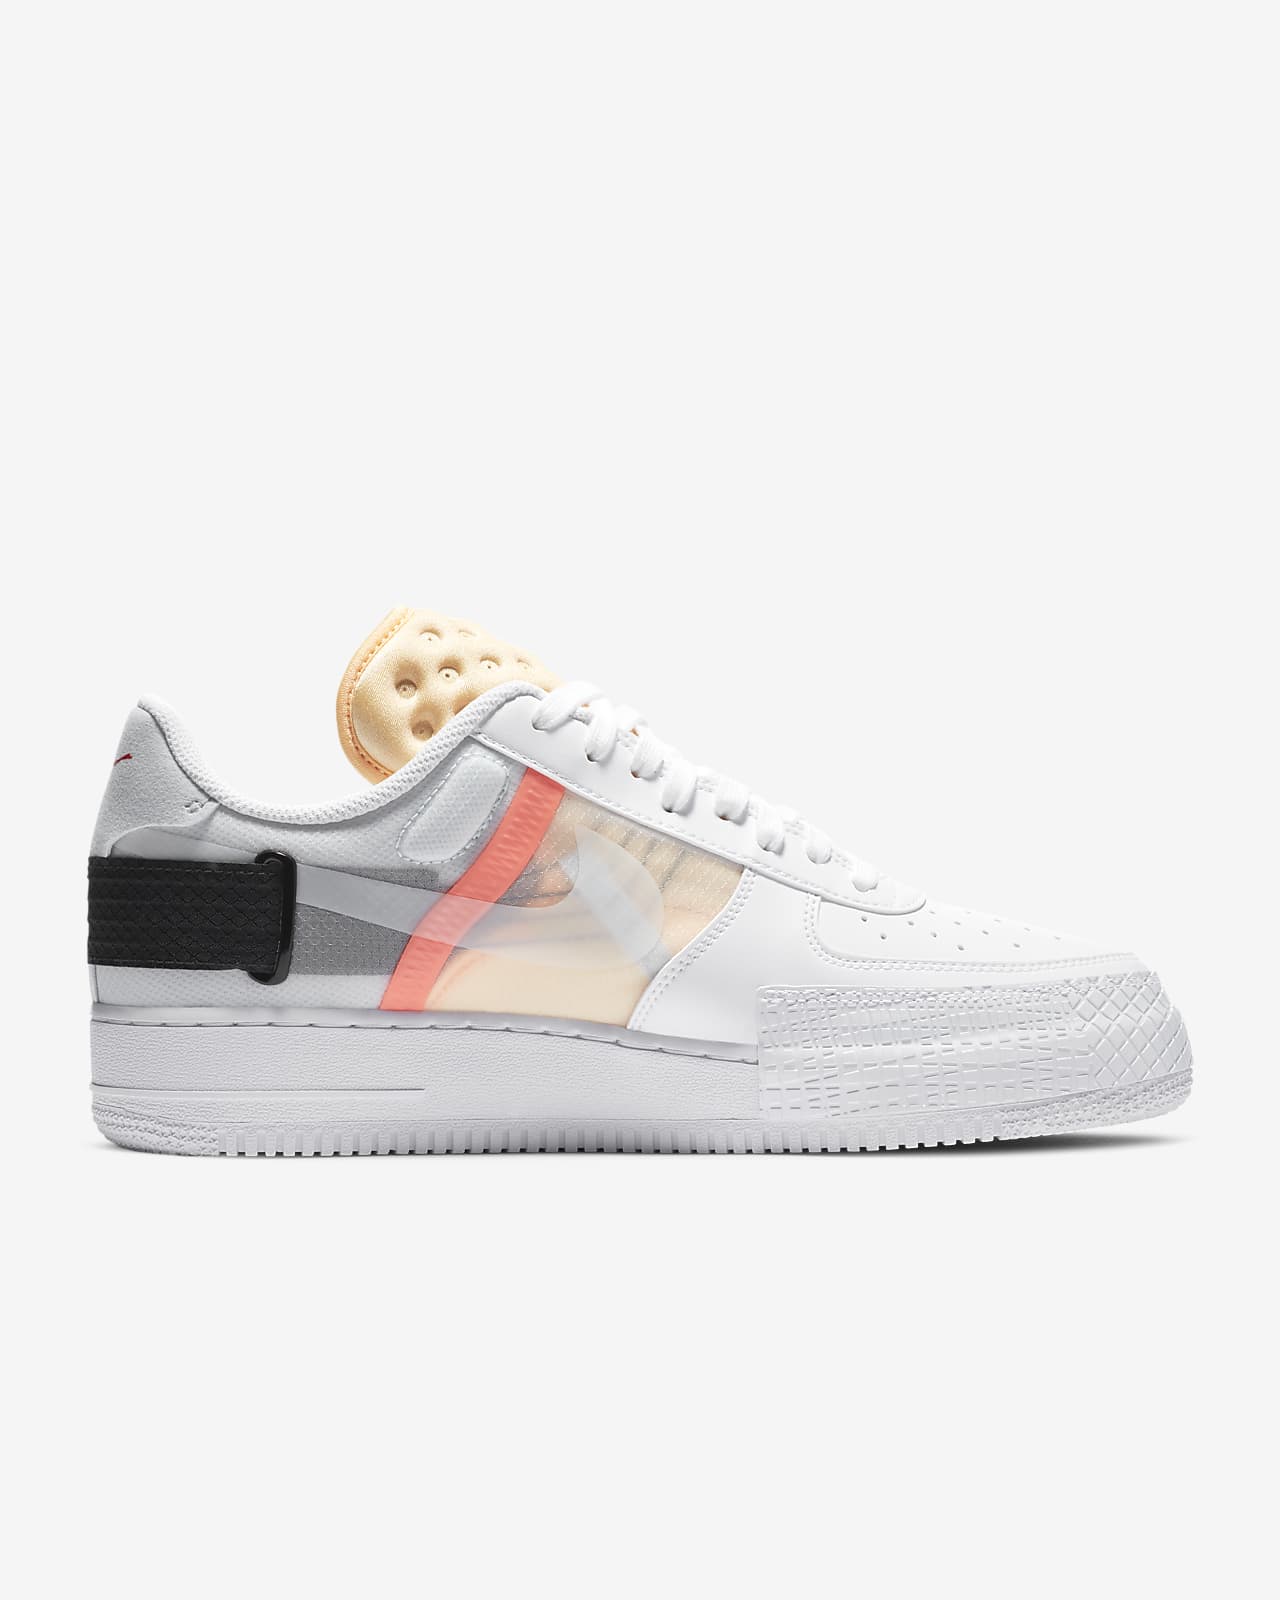 nike air force 1 type homme chaussures